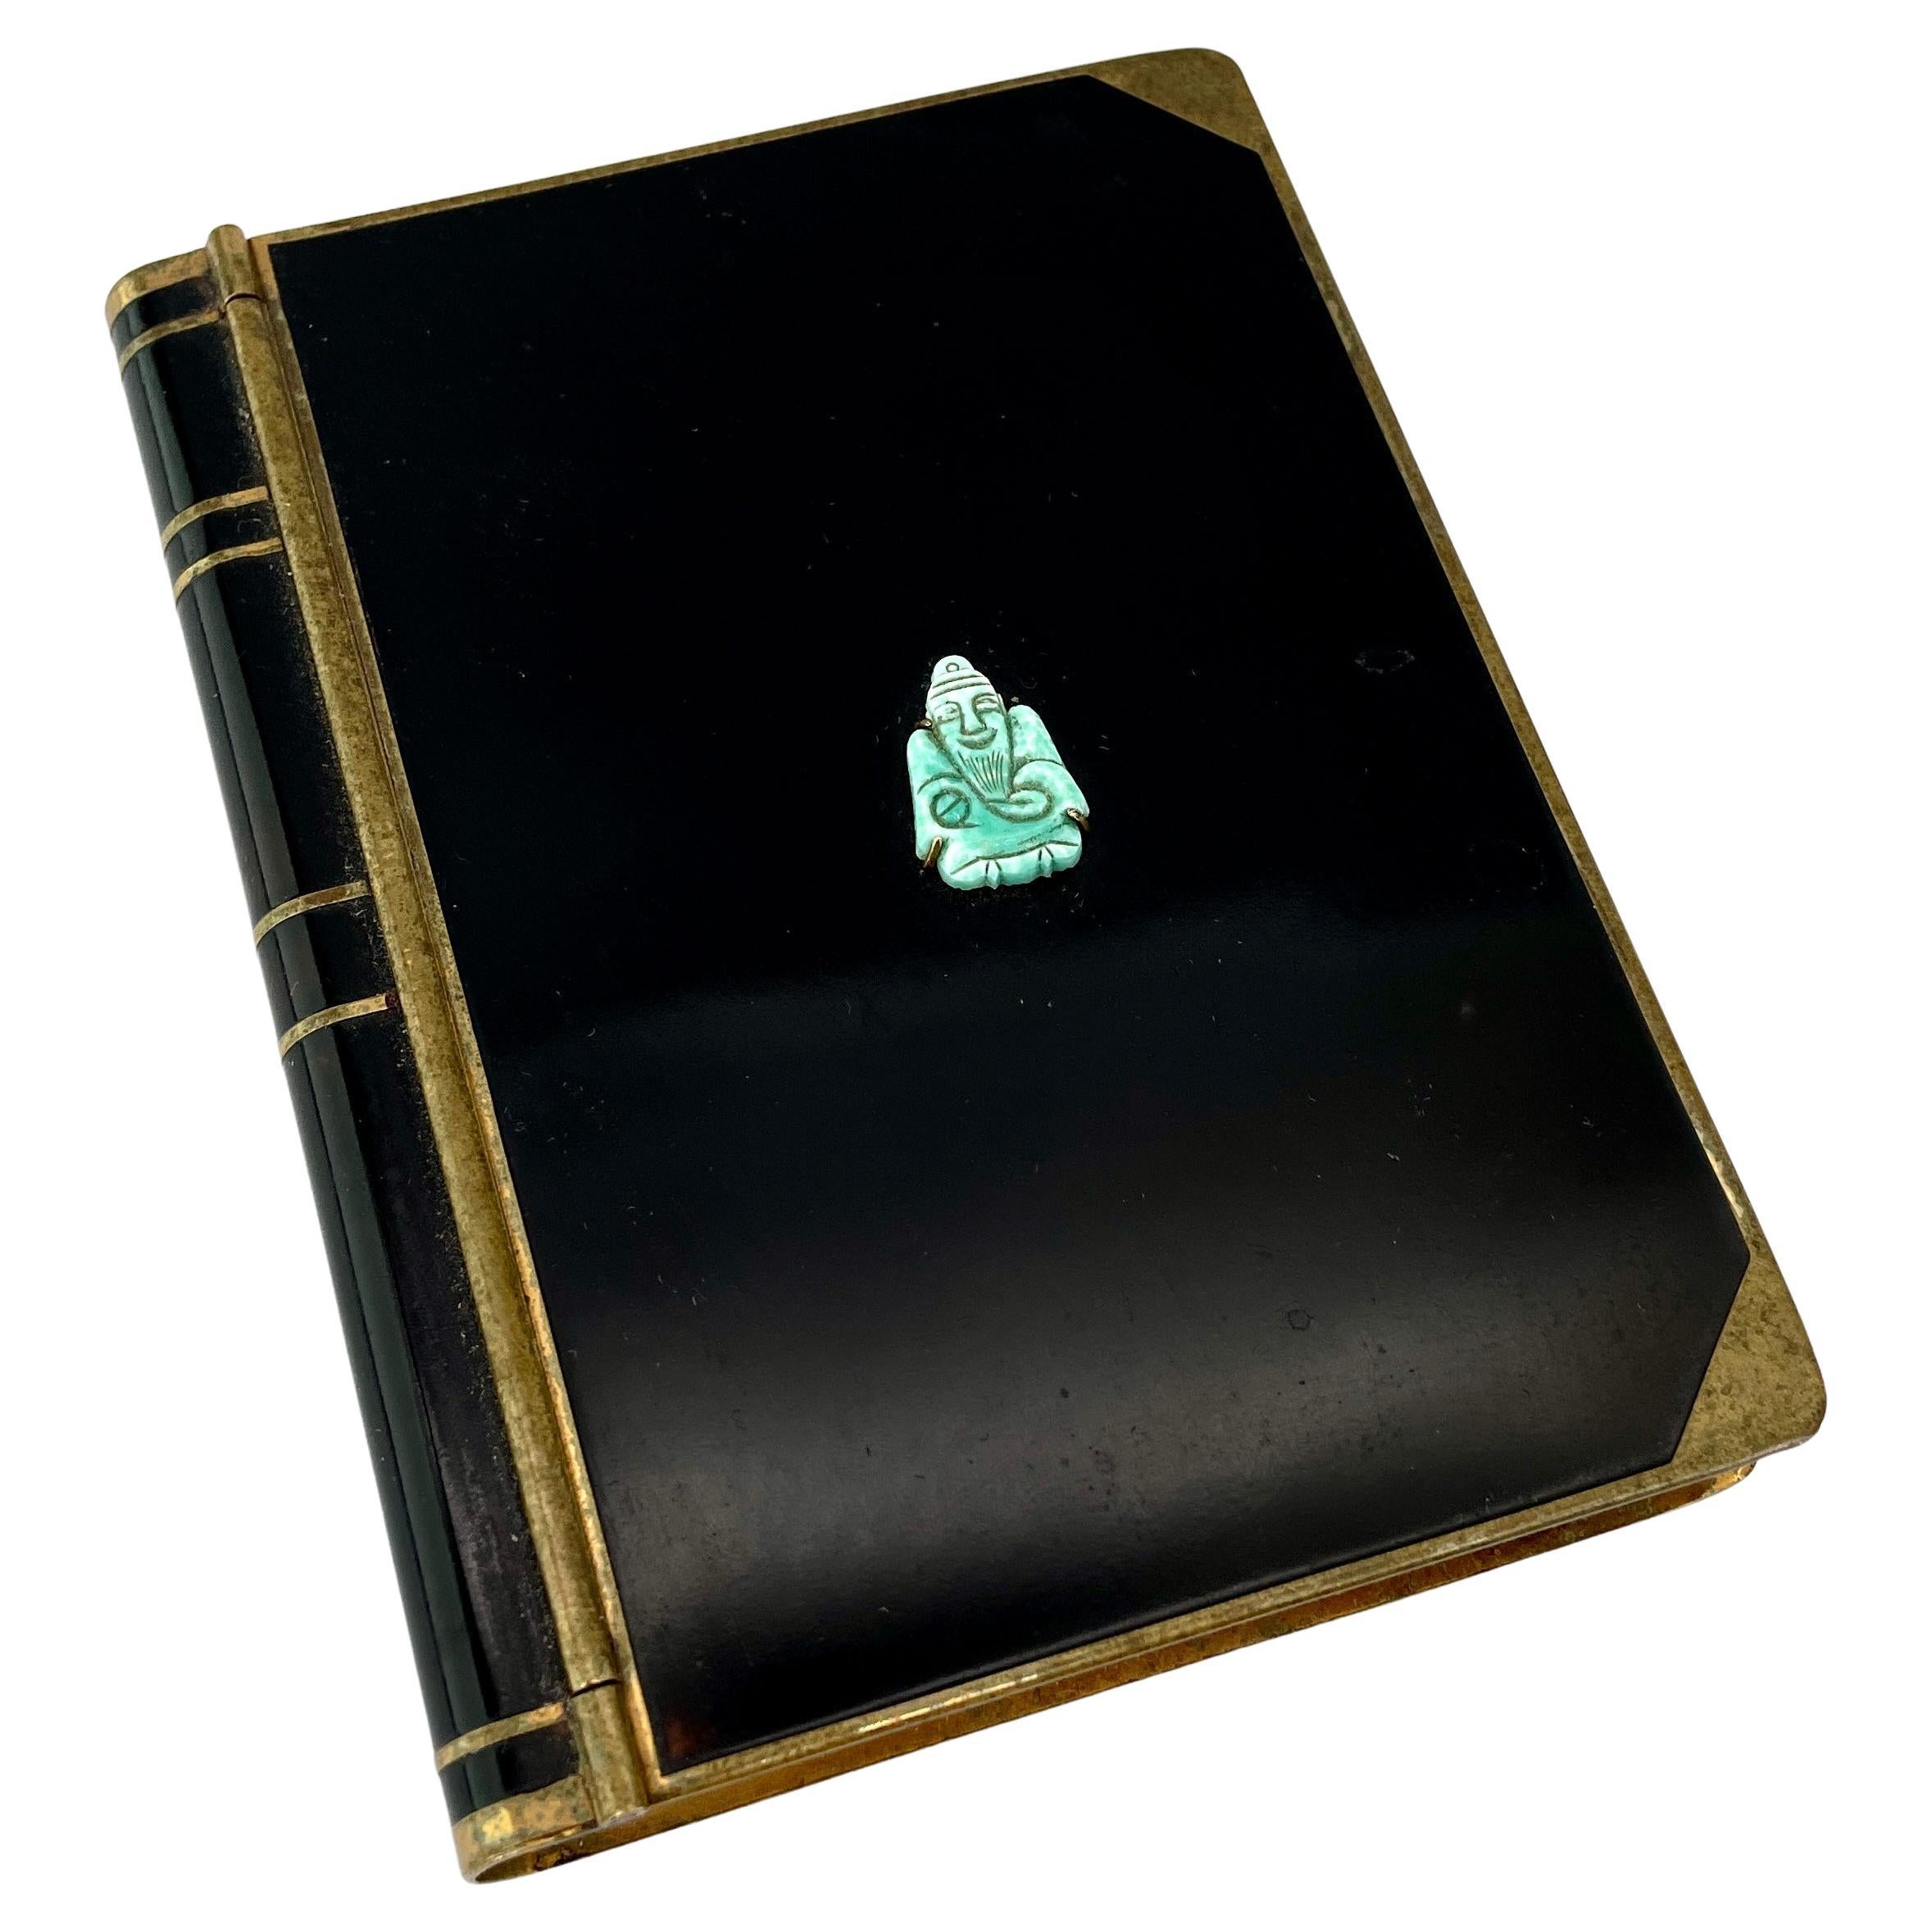 1940s Jeweled Enameled Brass Daybook Phonebook Note Pad with Stone Buddah